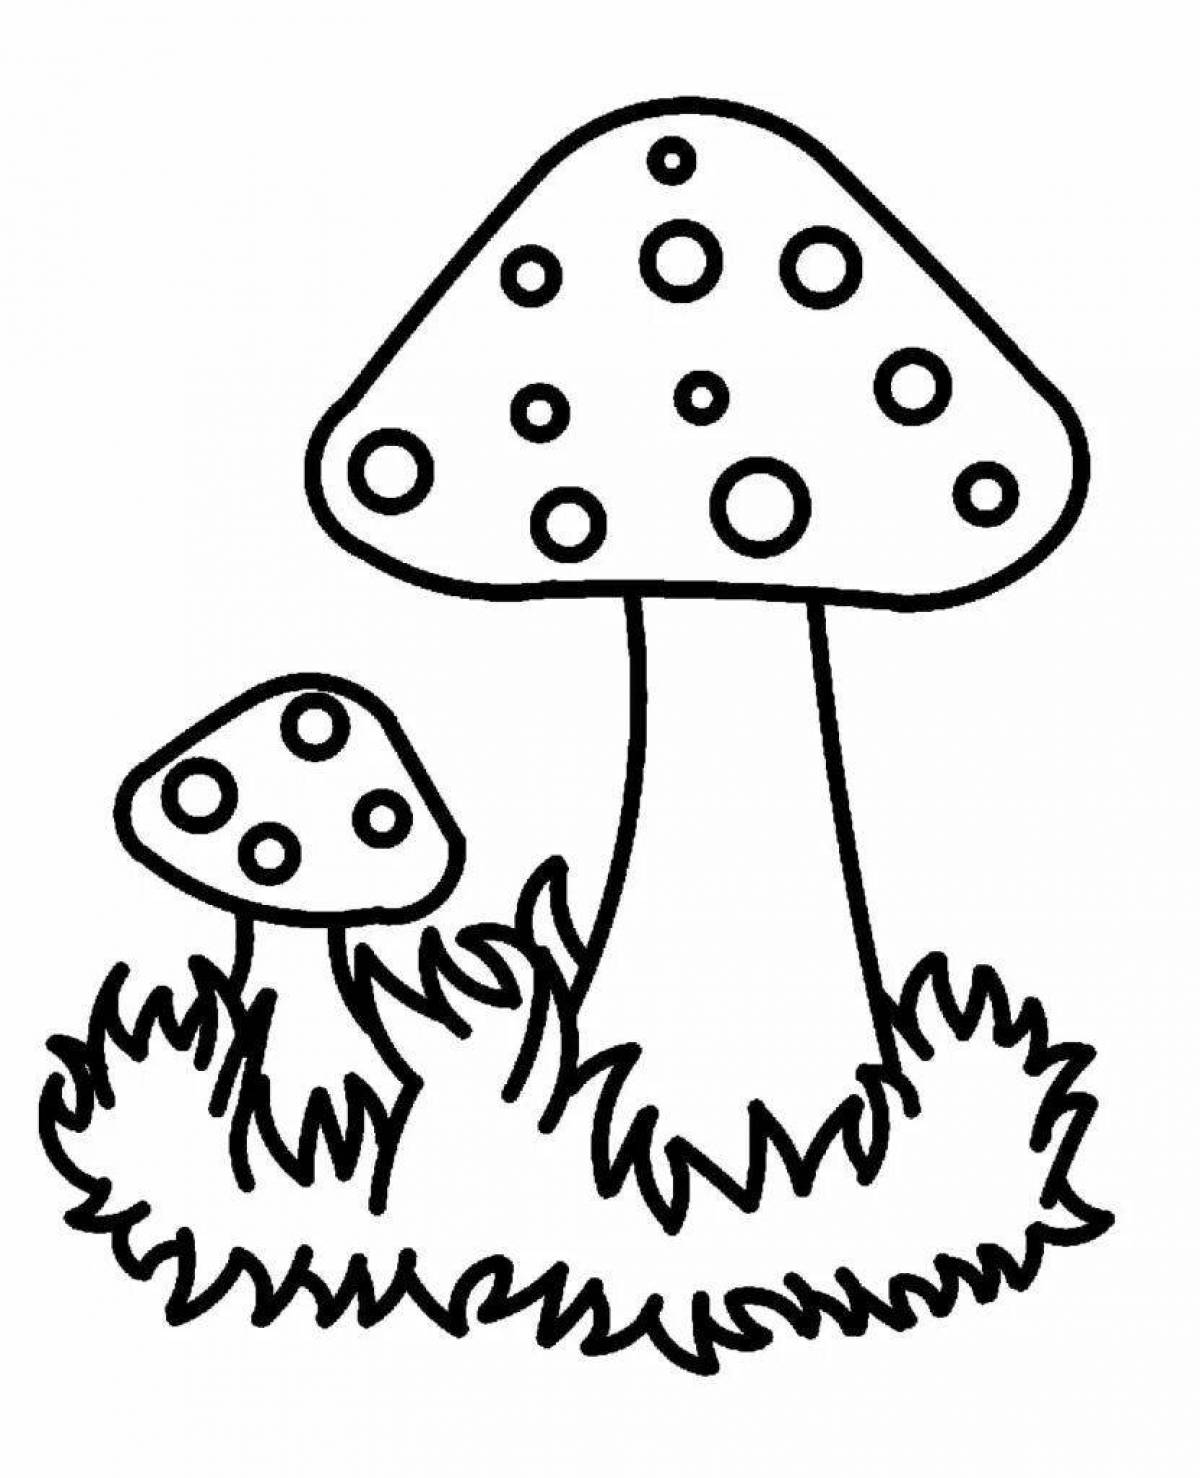 Incredible mushroom coloring book for 3-4 year olds